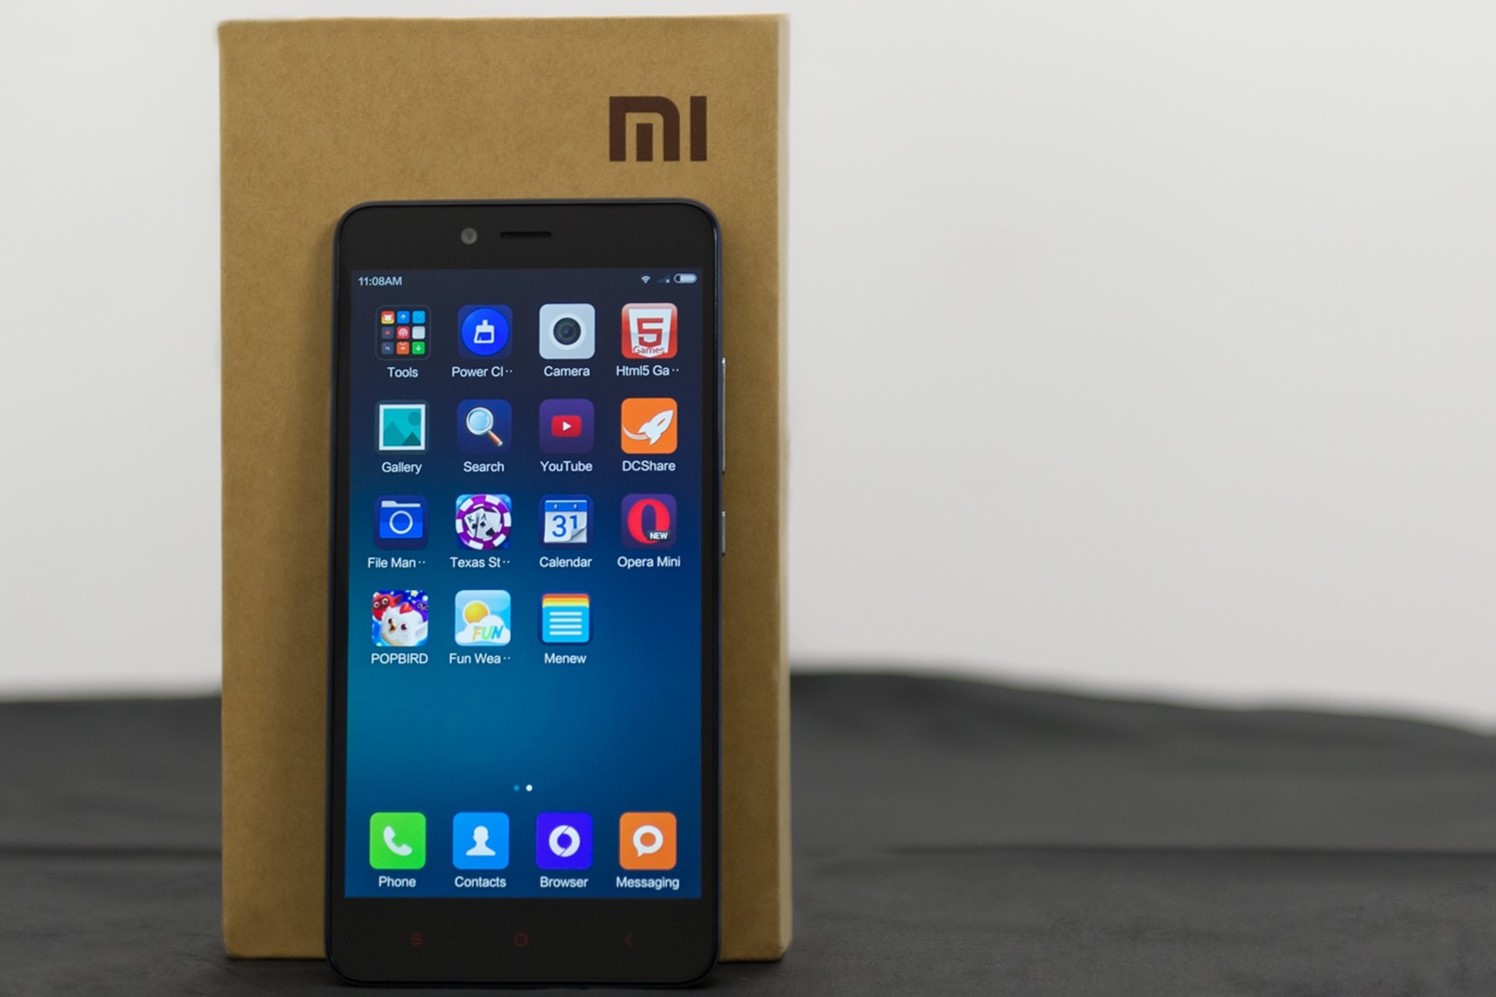 Verifying Developer ROM On Xiaomi Redmi Note 2: Step-by-Step Guide